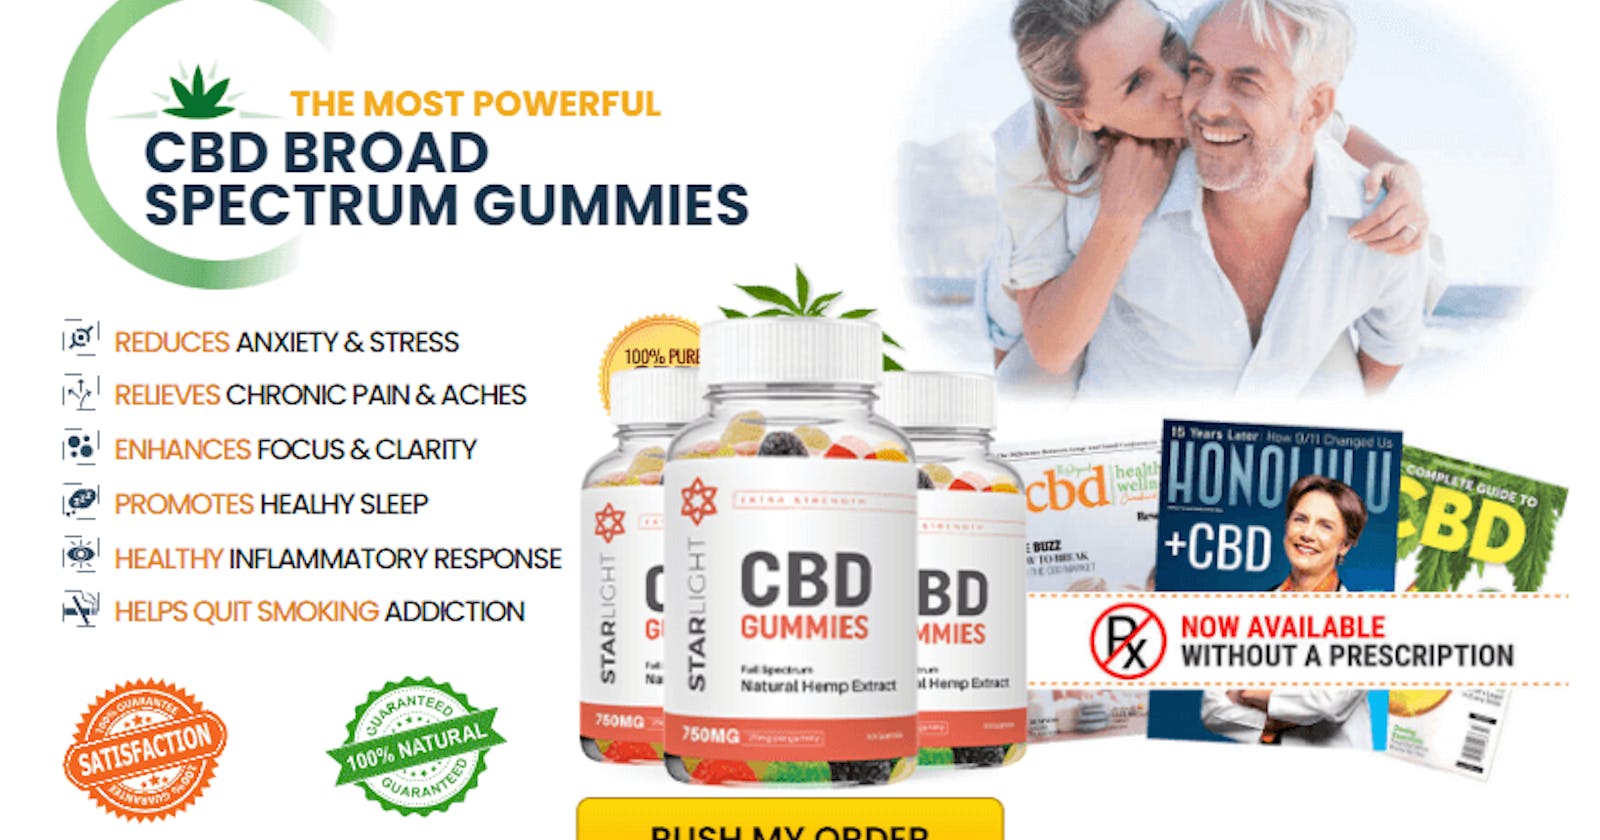 Starlight CBD Gummies Reviews Official Website Real Benefits or Side Effects? | Special Offer